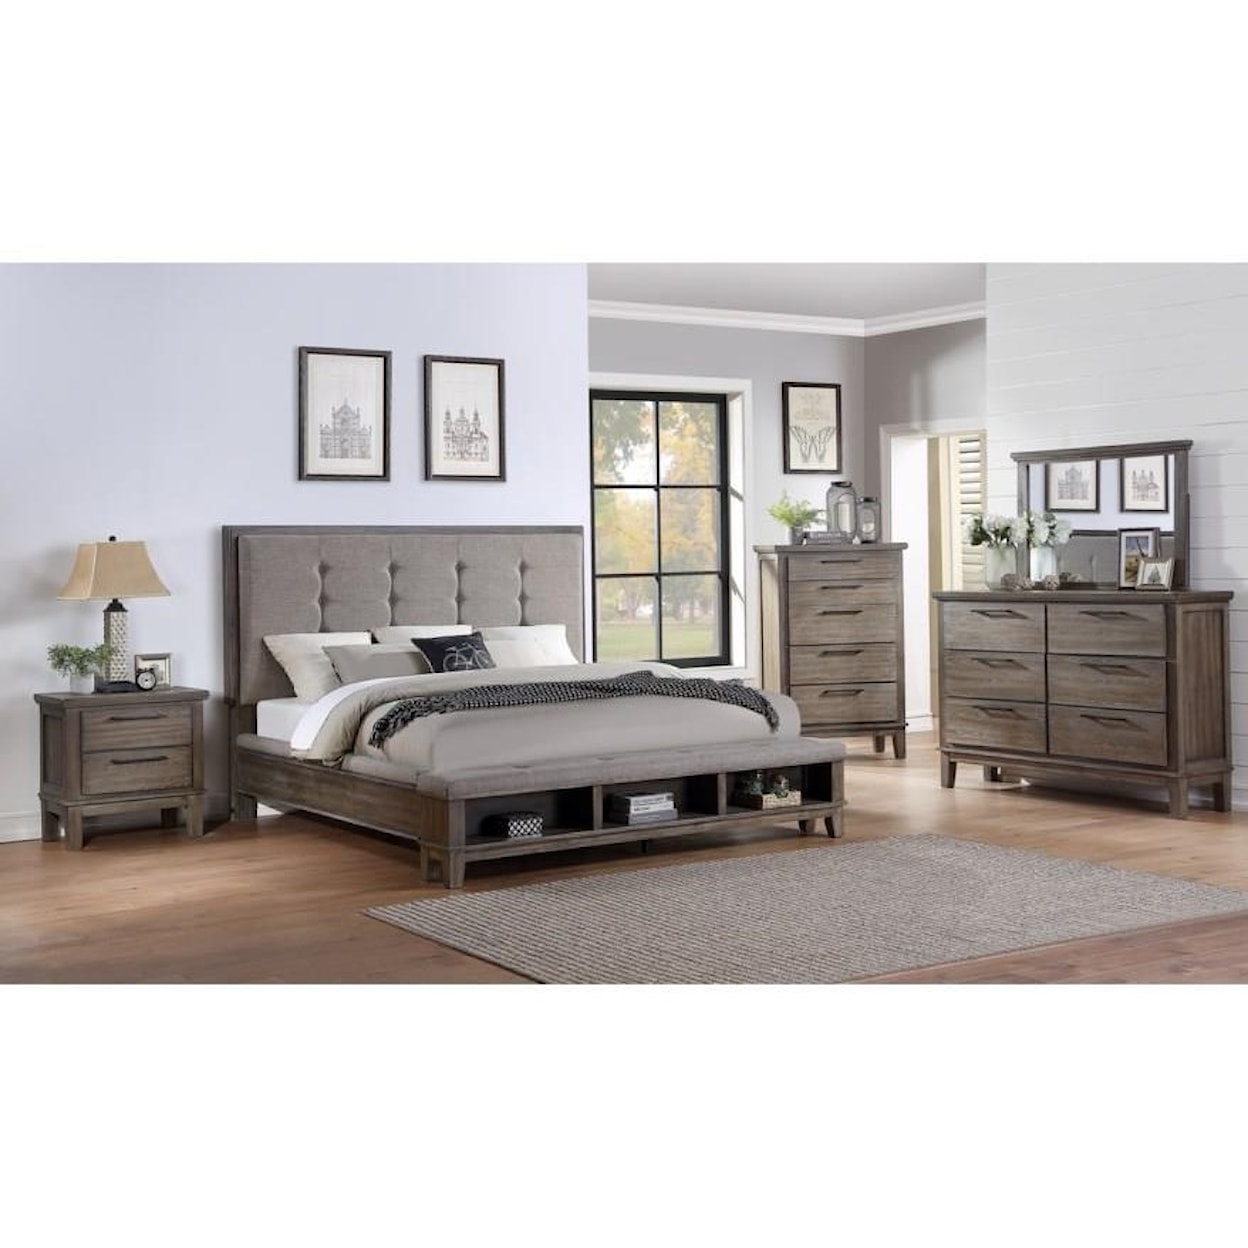 New Classic Cagney 5PC Queen Bedroom Group